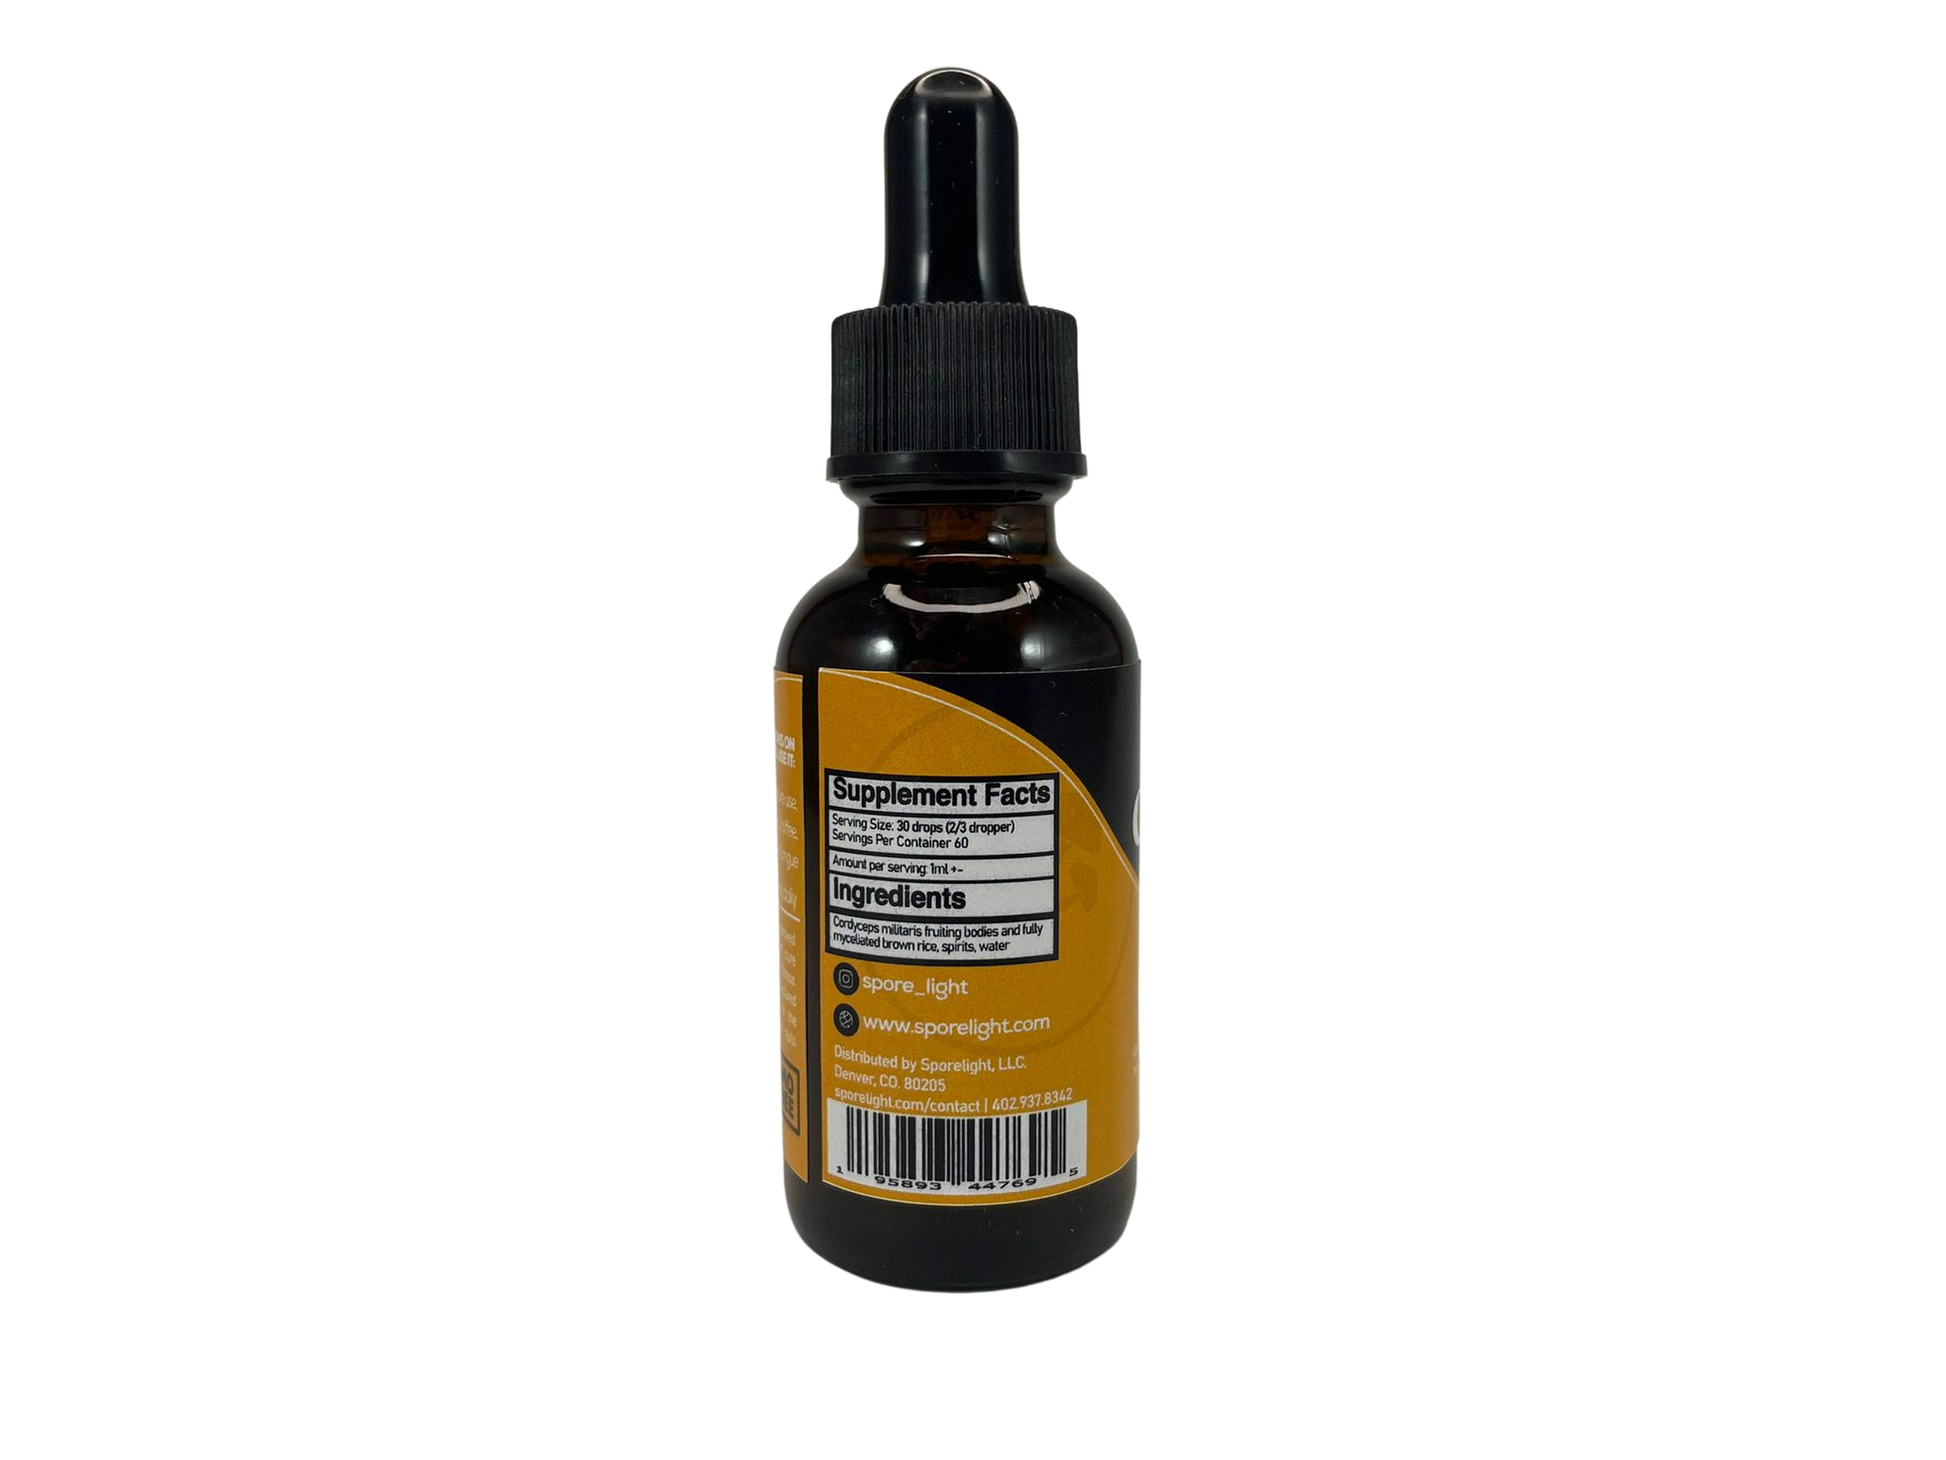 Spore Light Cordyceps extract, Energy Supplement. Supplement Facts on the back of the bottle, 1FL OZ.